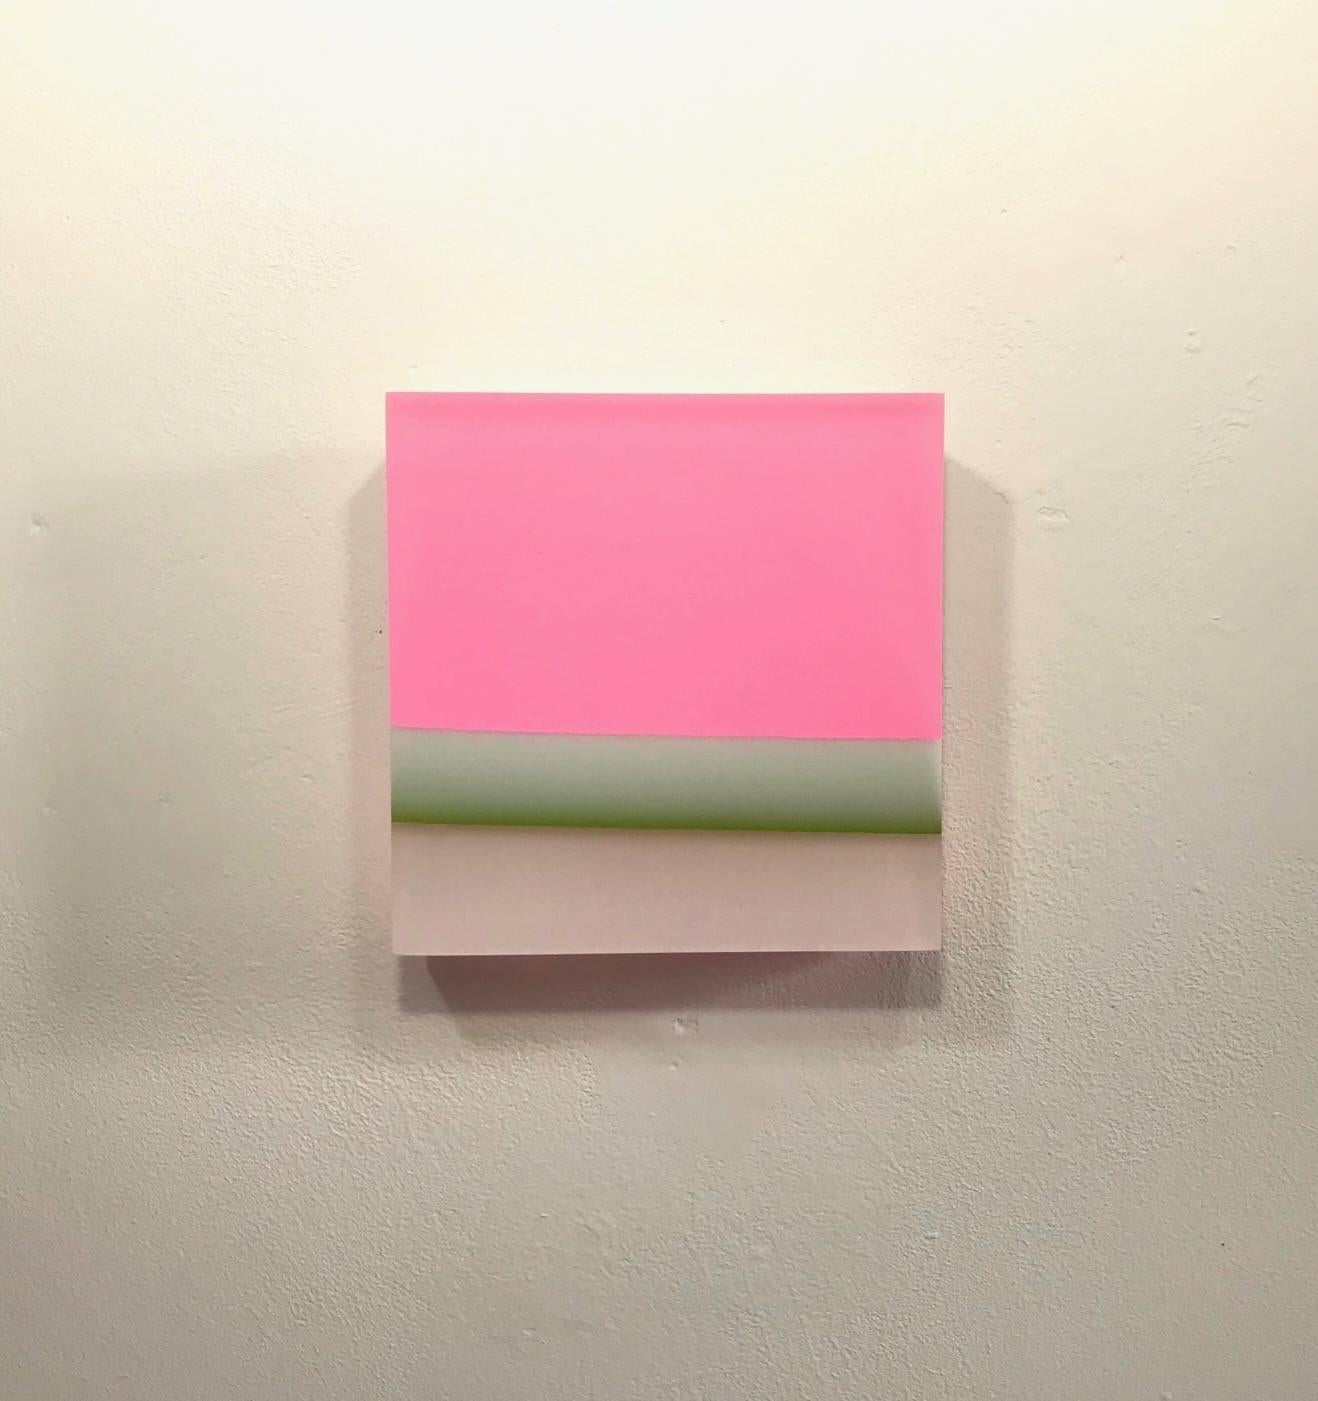 Untitled #12 green and pink- abstract modern translucent mural wall sculpture - Mixed Media Art by Michelle Benoit